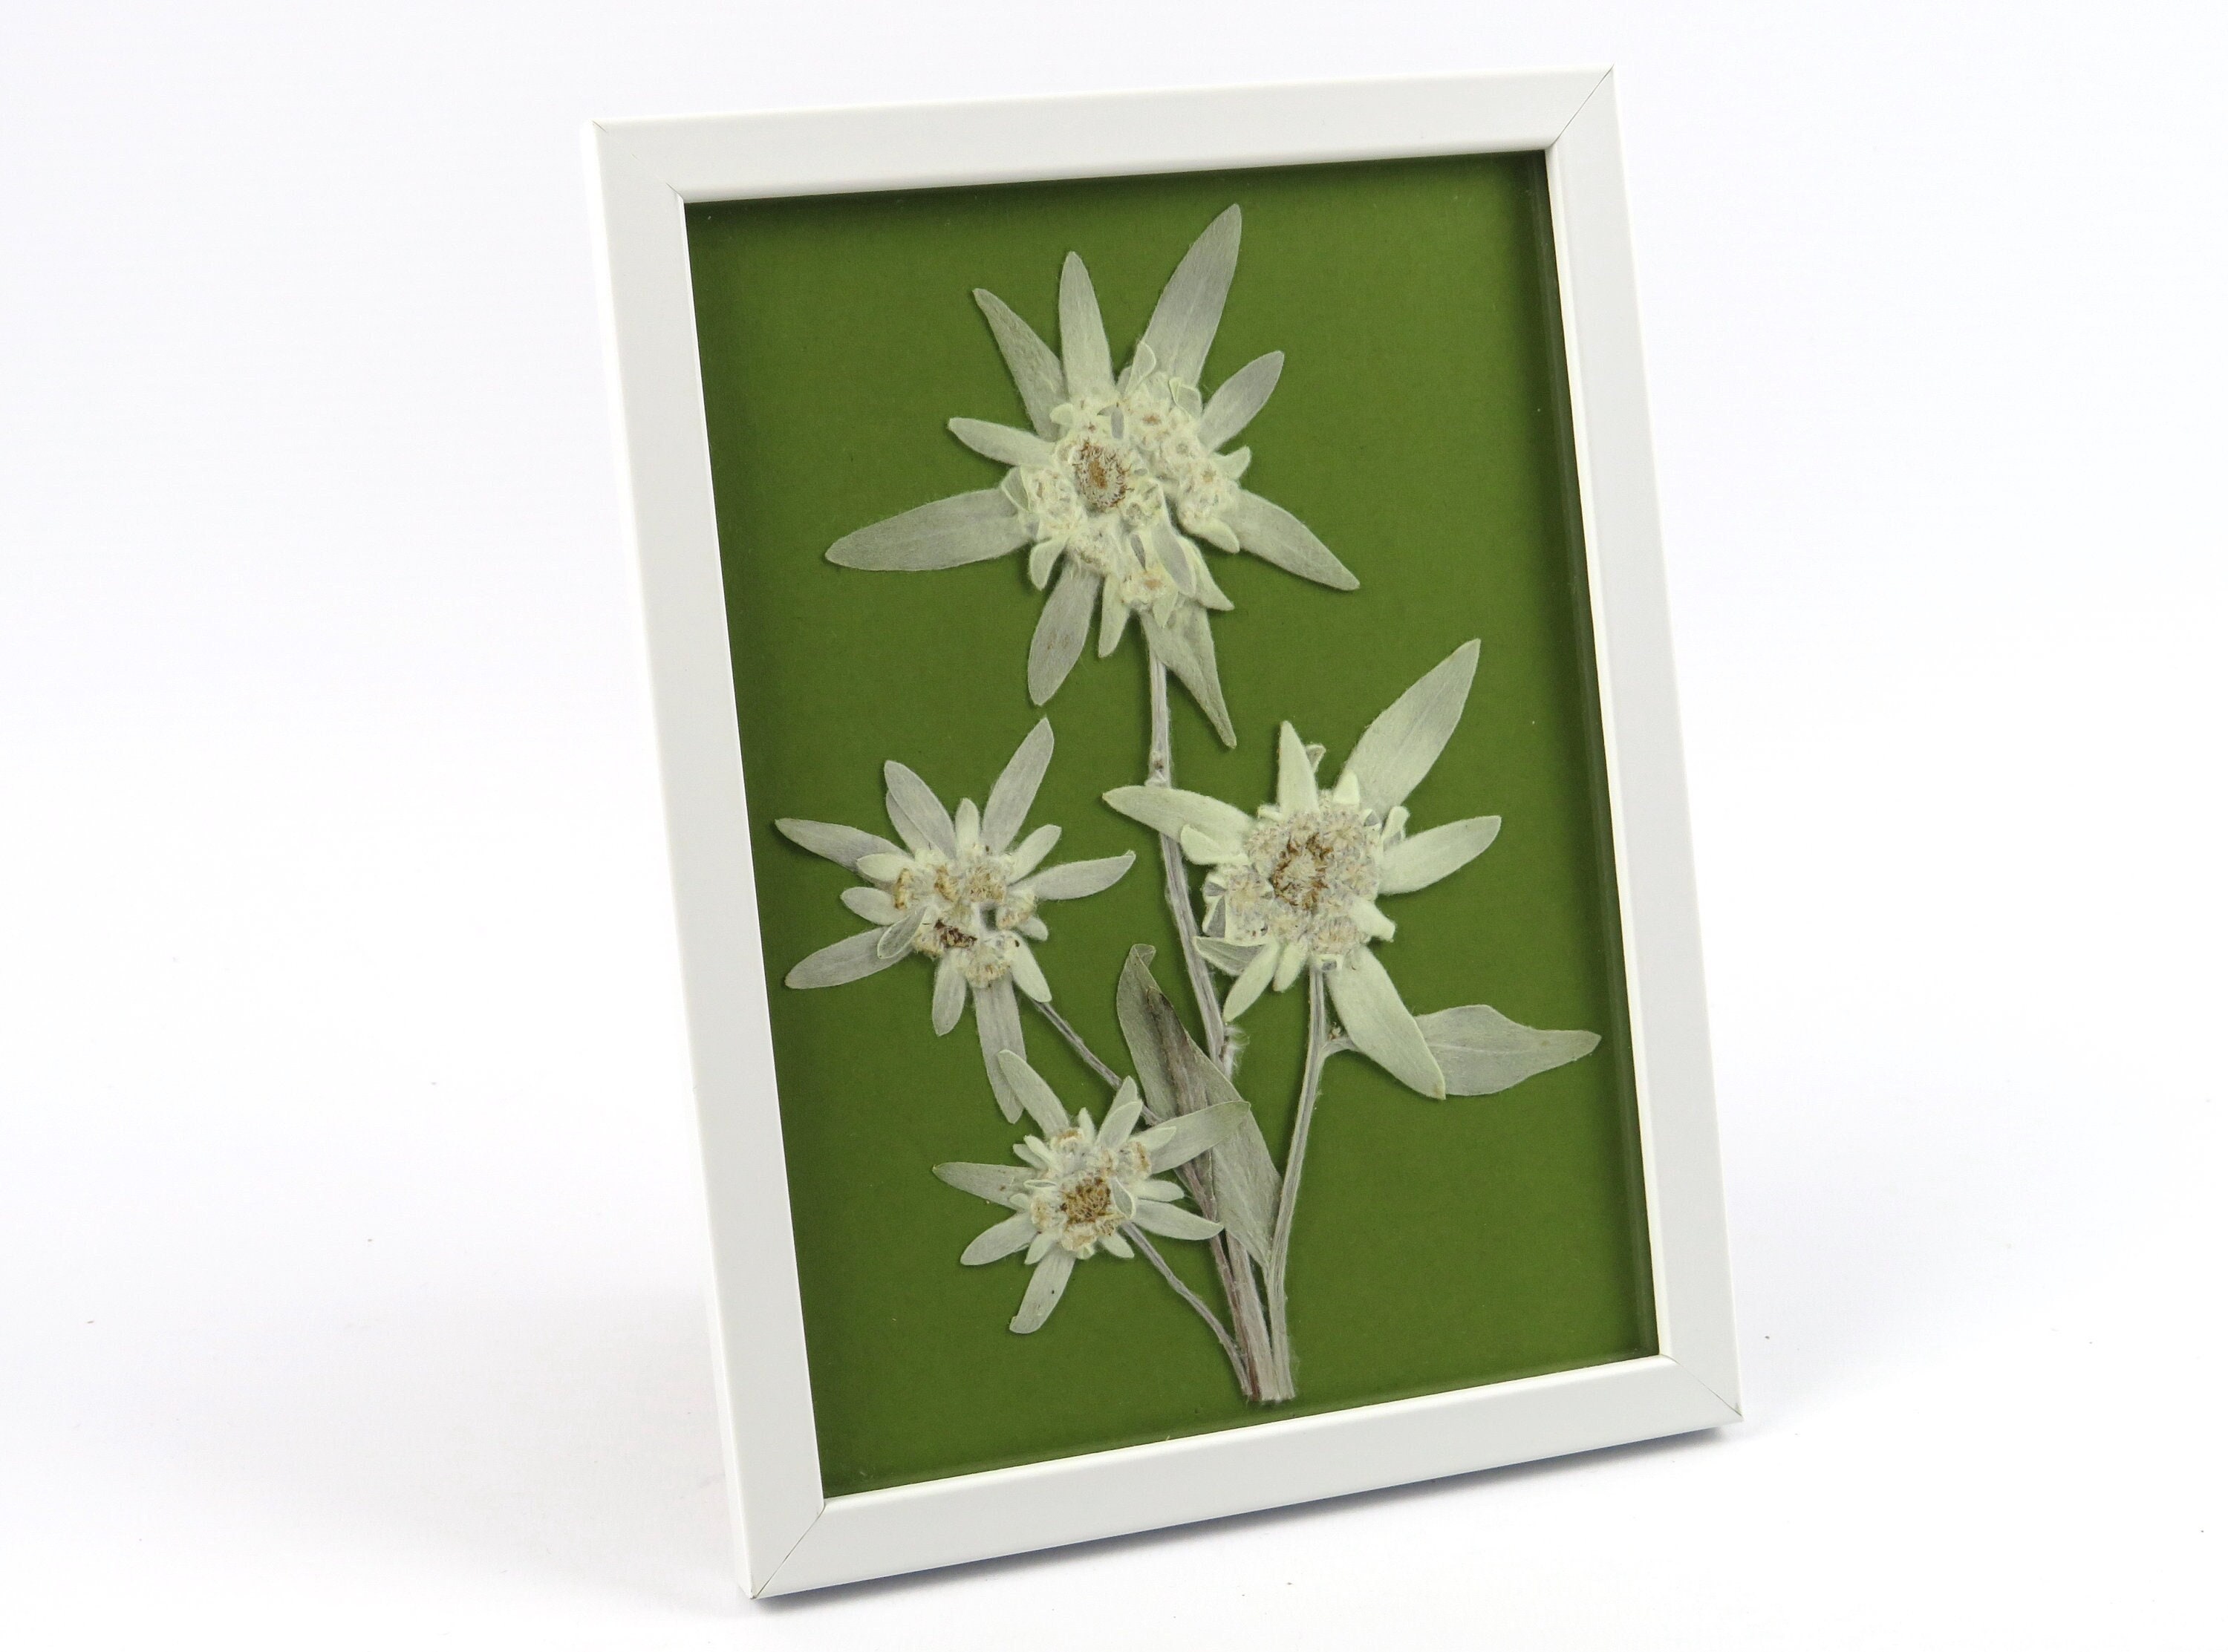 Preserved edelweiss - Etsy France